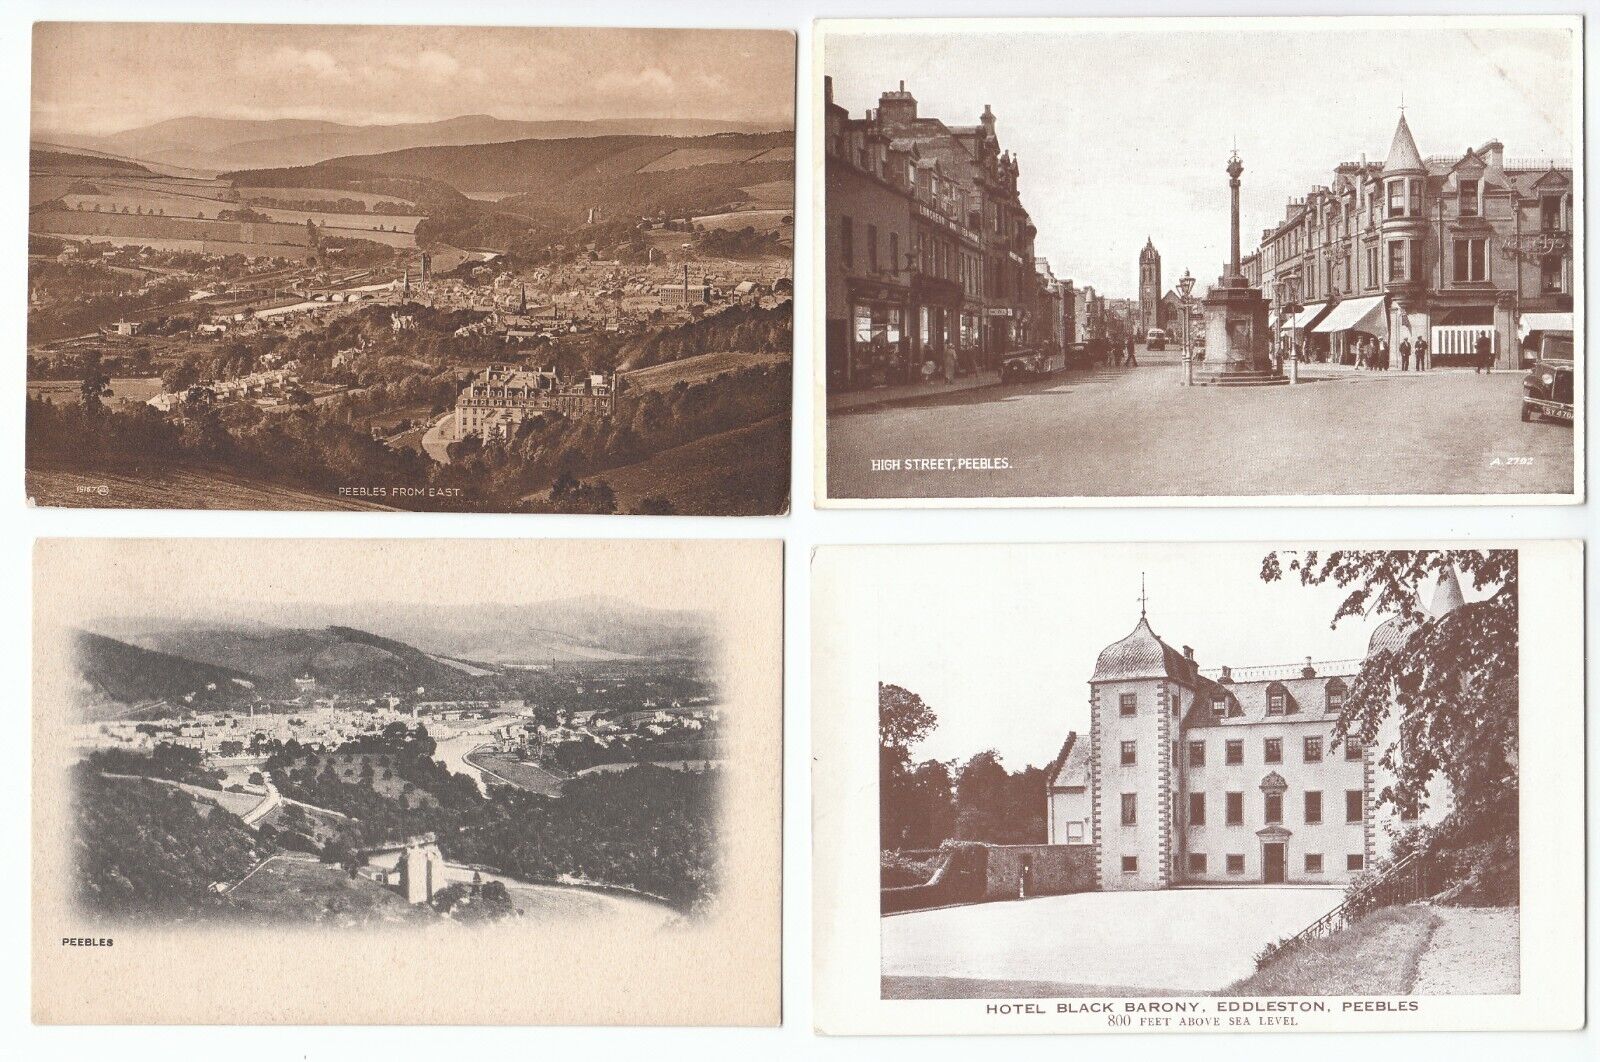 House Clearance - 10 Peebles Peeblesshire Scotland Scottish Old Services All Cards Shown (N7)